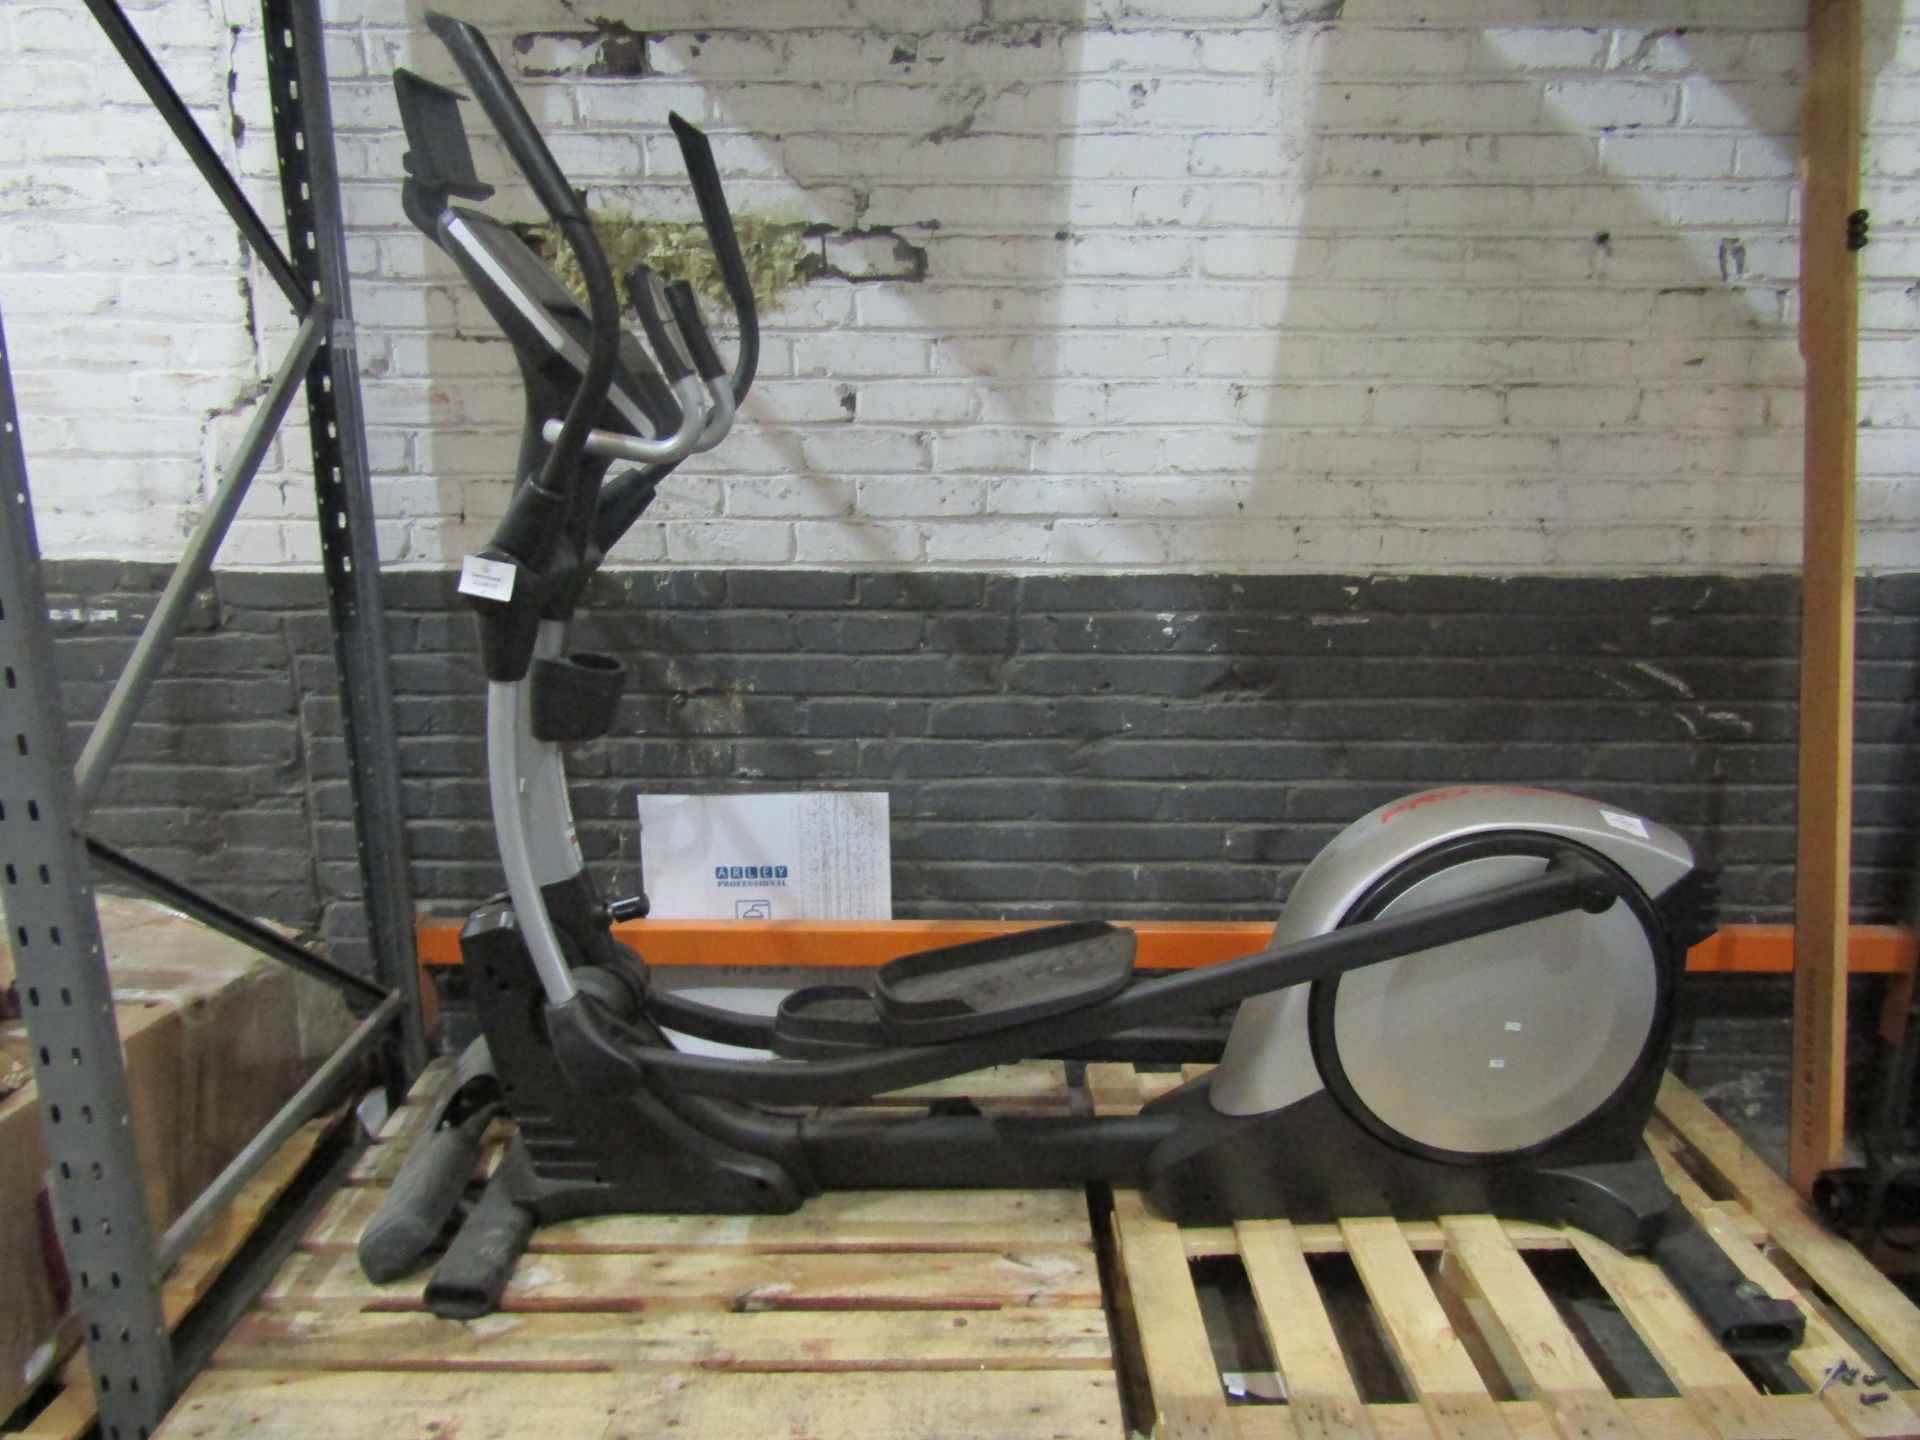 Pro-Form - Smart Strider 495 CSE Elliptical Trainer - Untested, Assembled - No Packaging - Viewing - Image 2 of 2